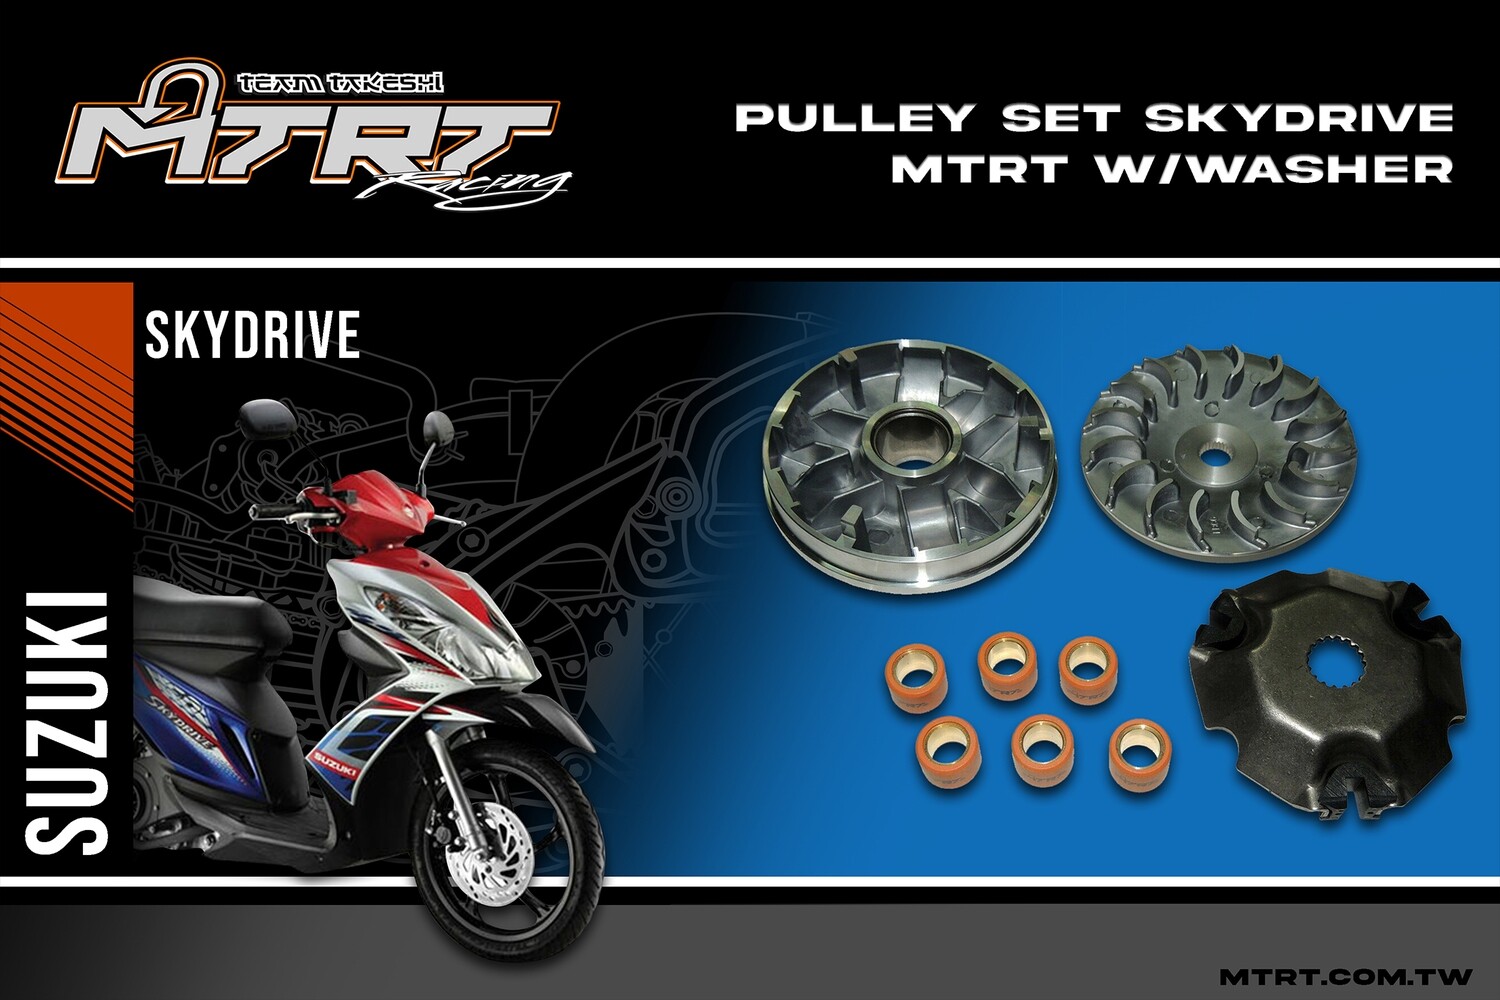 PULLEY SET SKYDRIVE MTRT washer